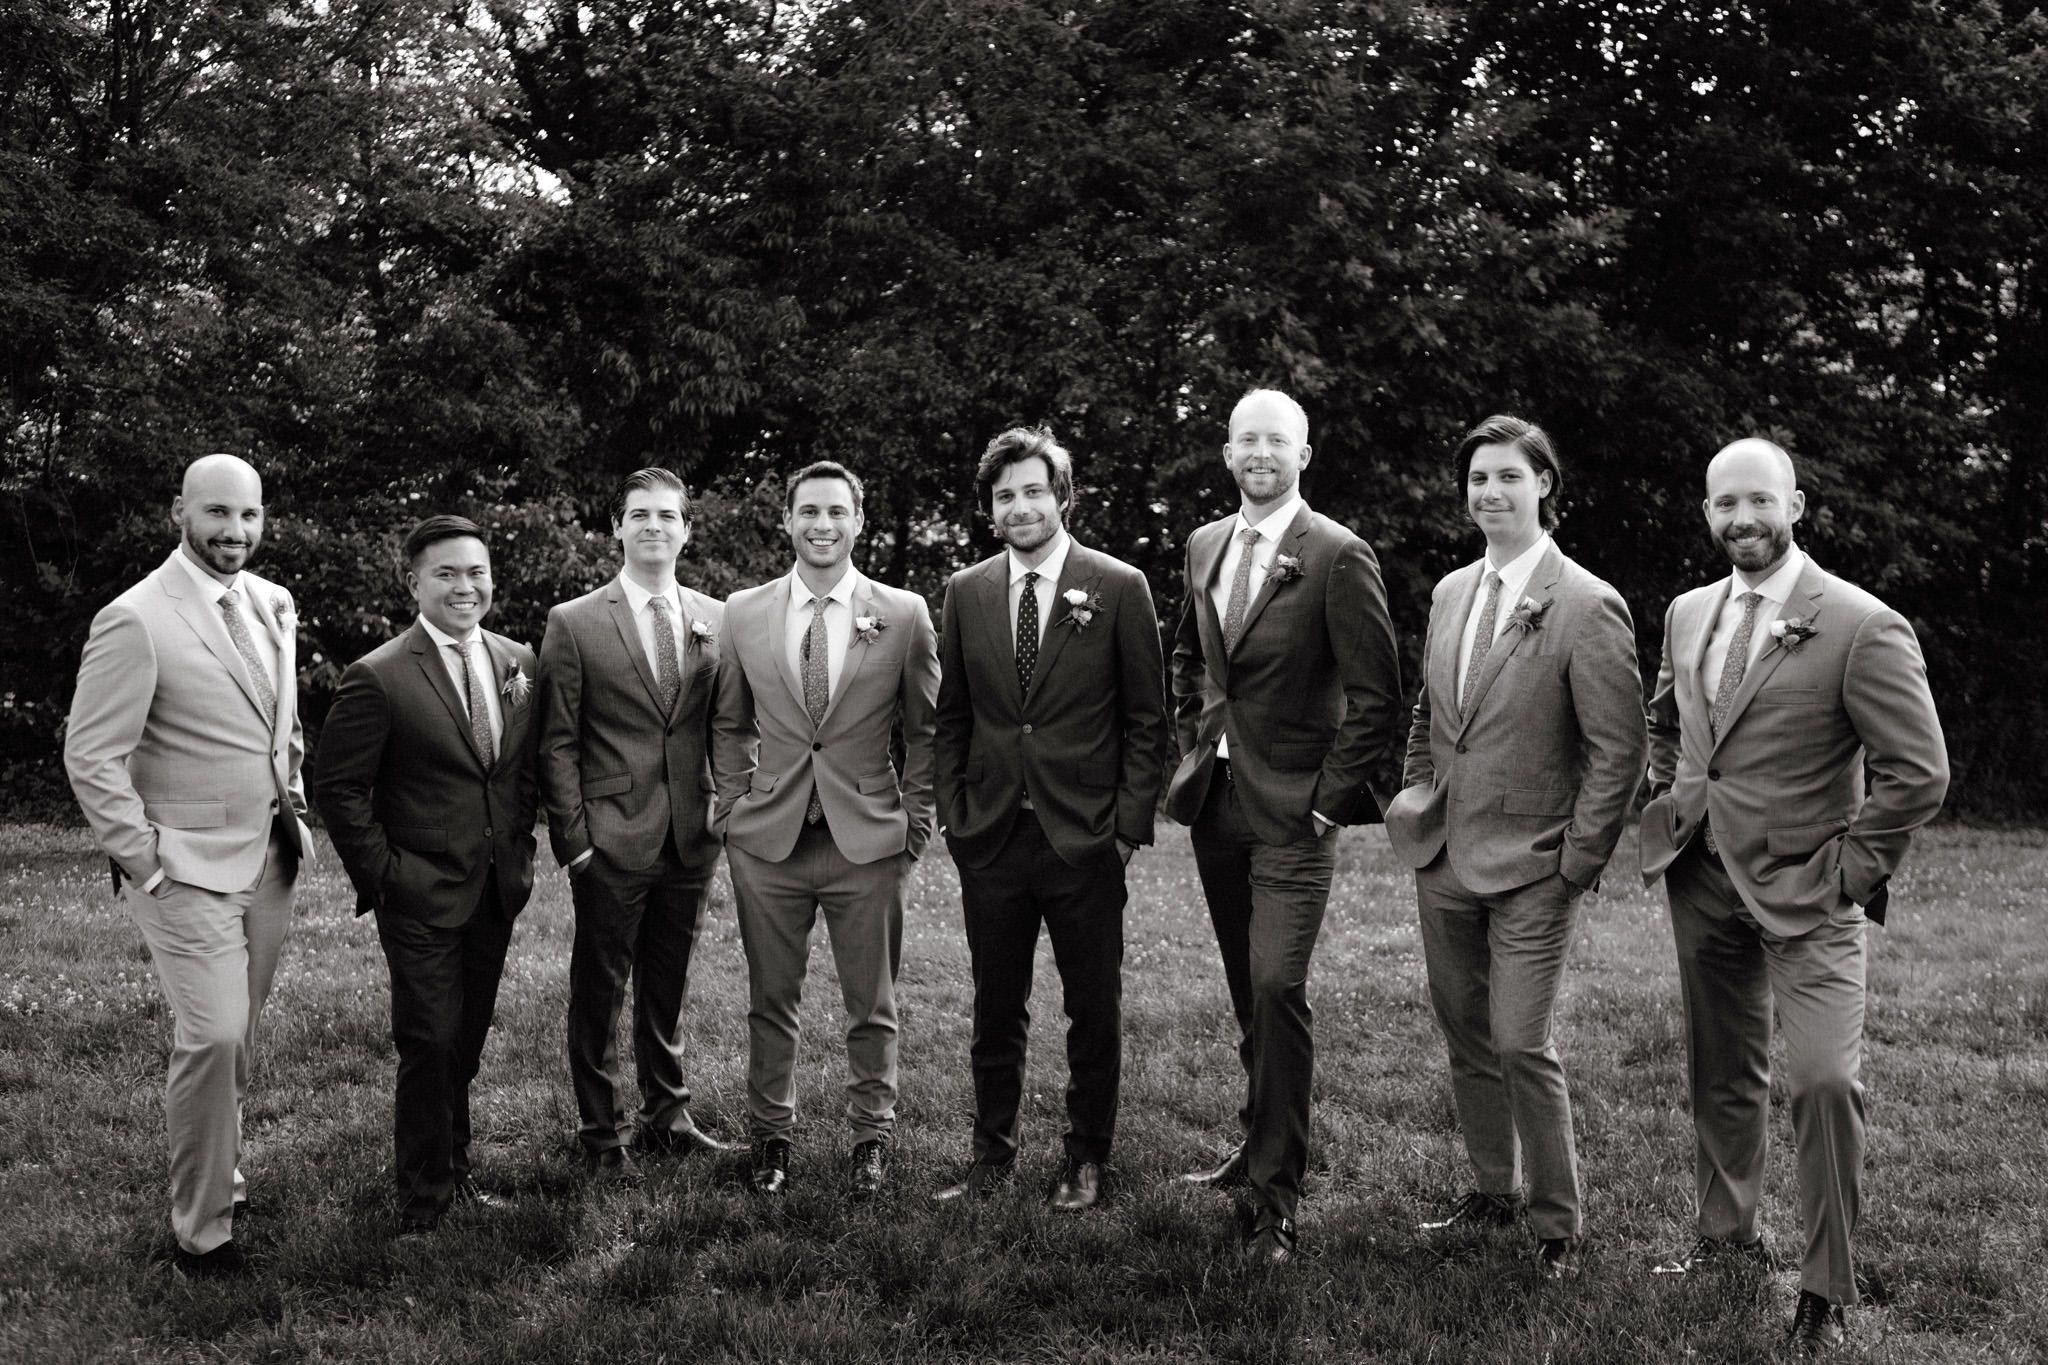 The groom is standing in the middle of his groomsmen in NYC. Image by Jenny Fu Studio